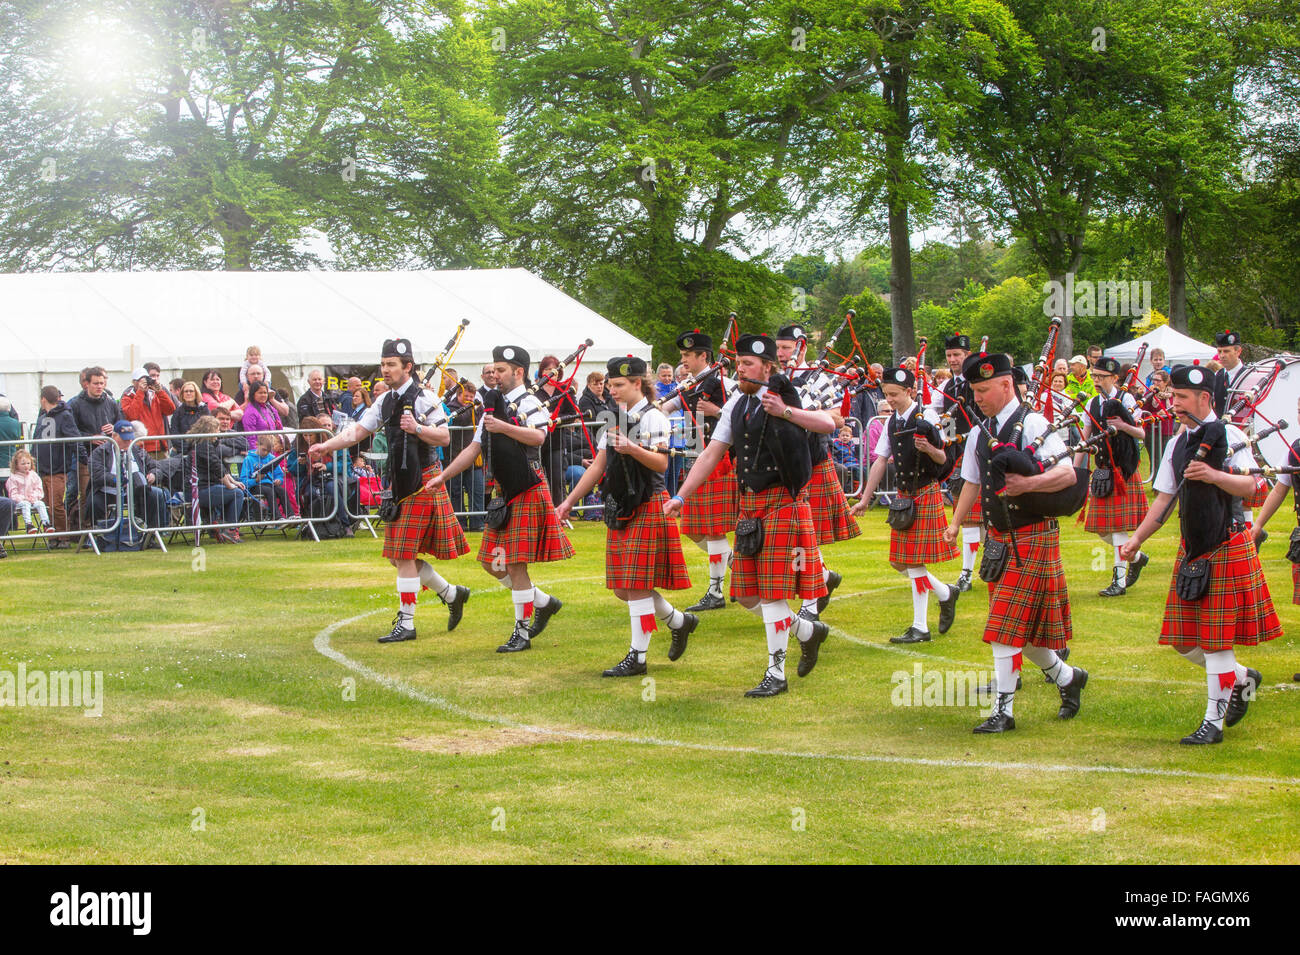 A pipe band marching in kilts at the Highland Games in Aberdeen, Scotland, UK Stock Photo